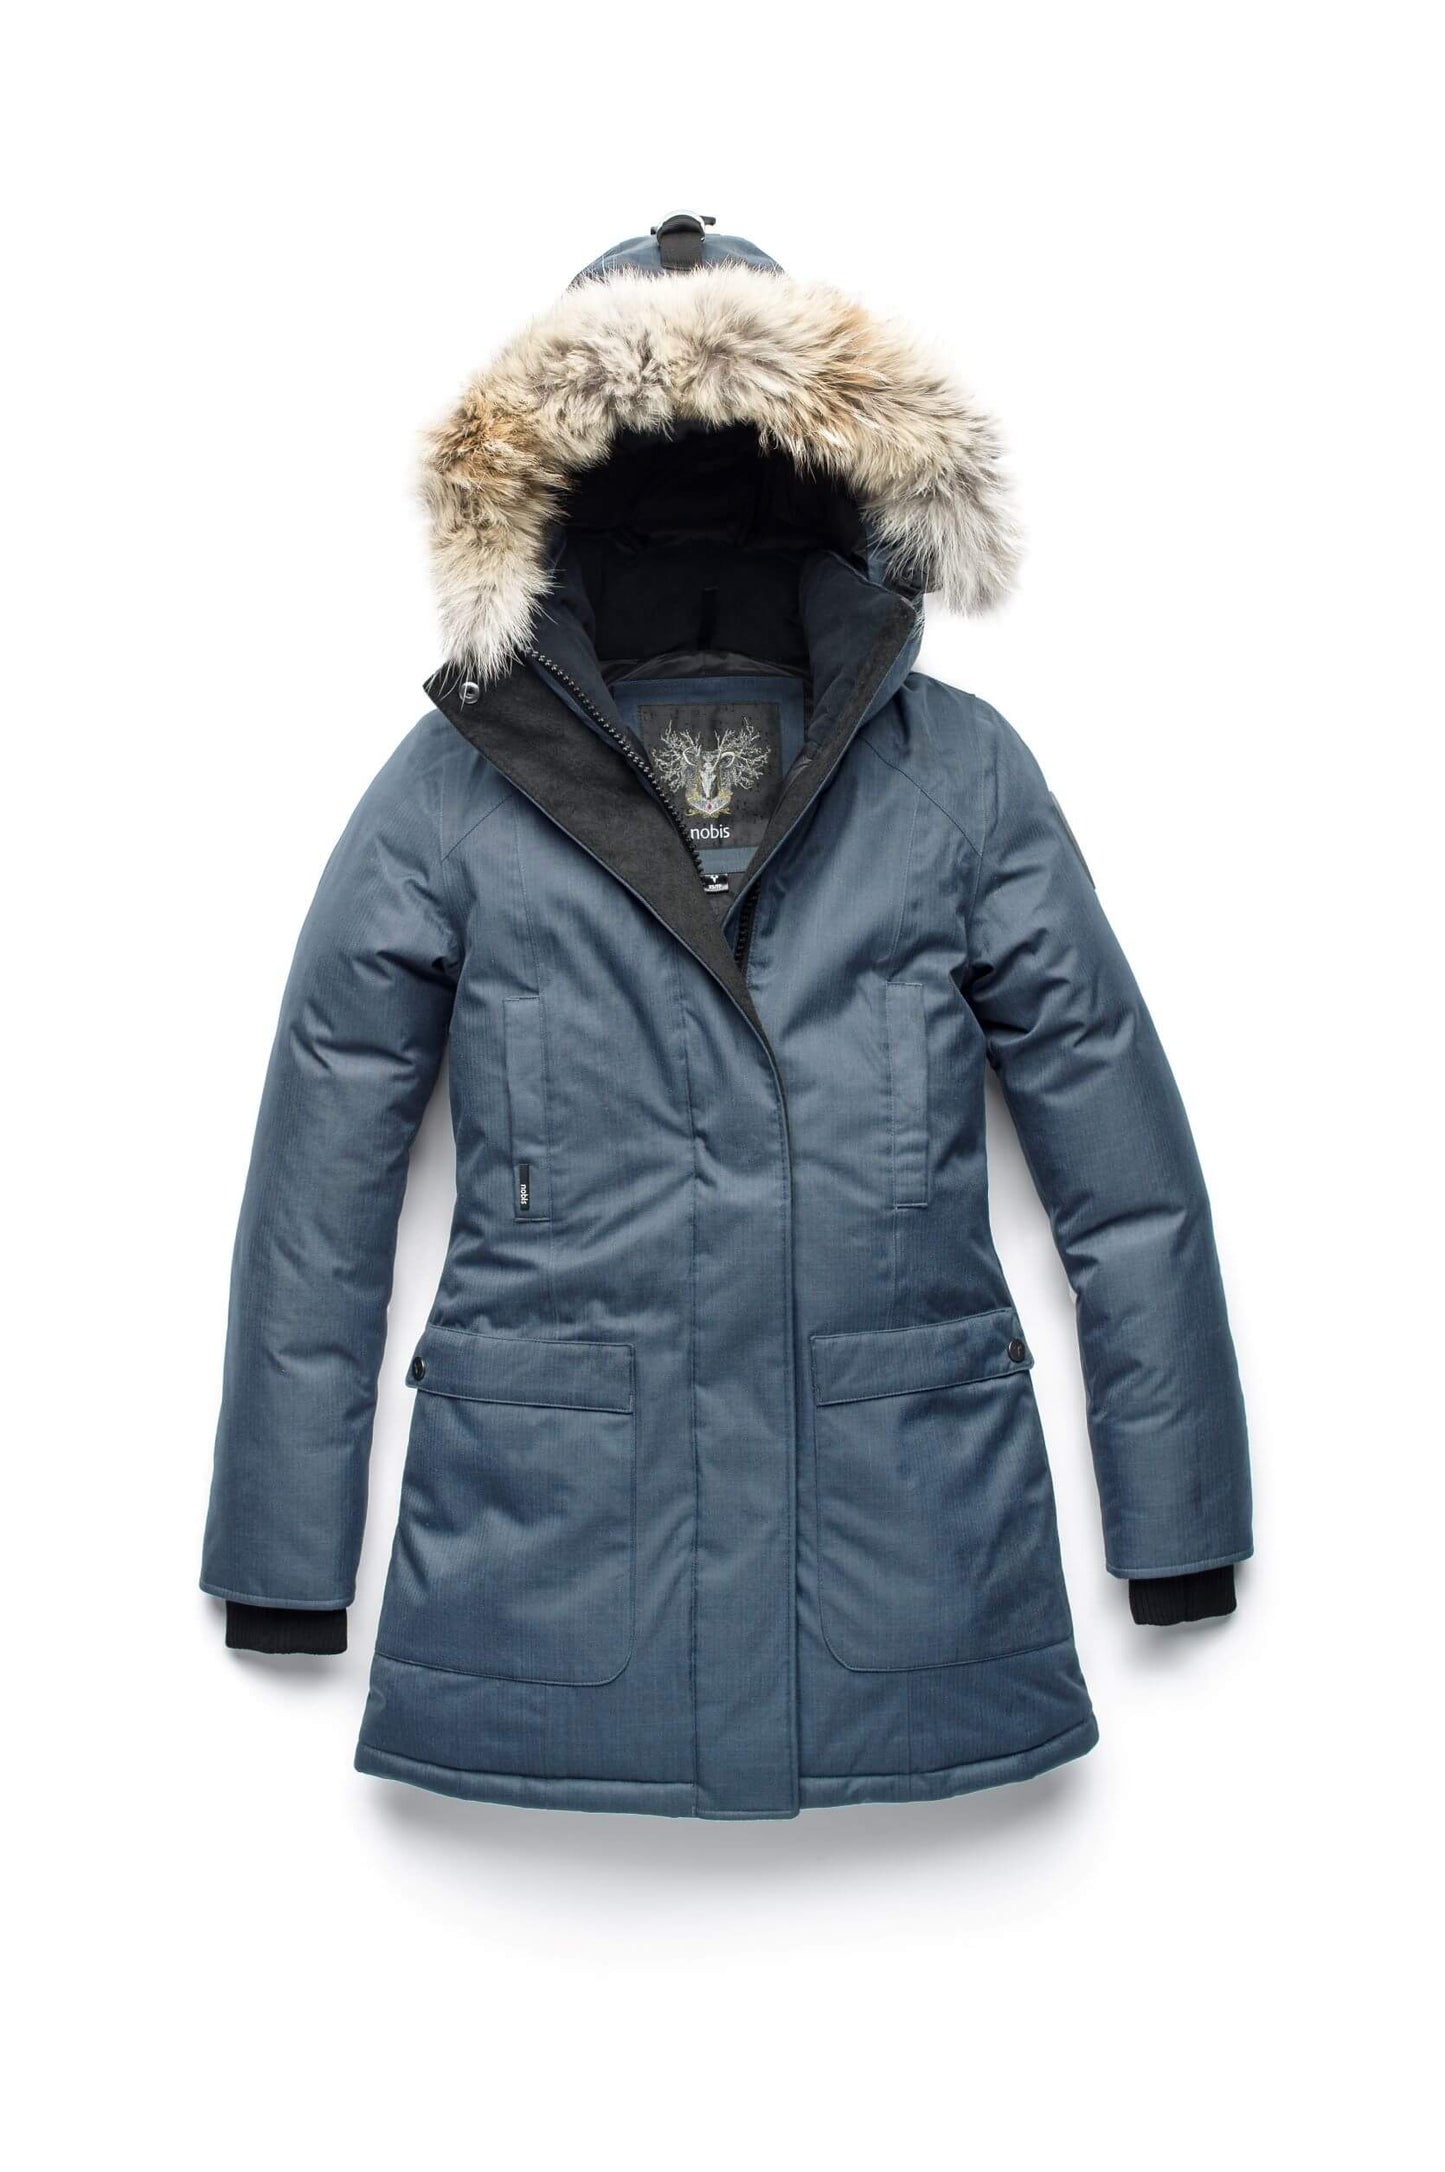 Women's down filled parka that sits just below the hip with a clean look and two hip patch pockets in CH Balsam